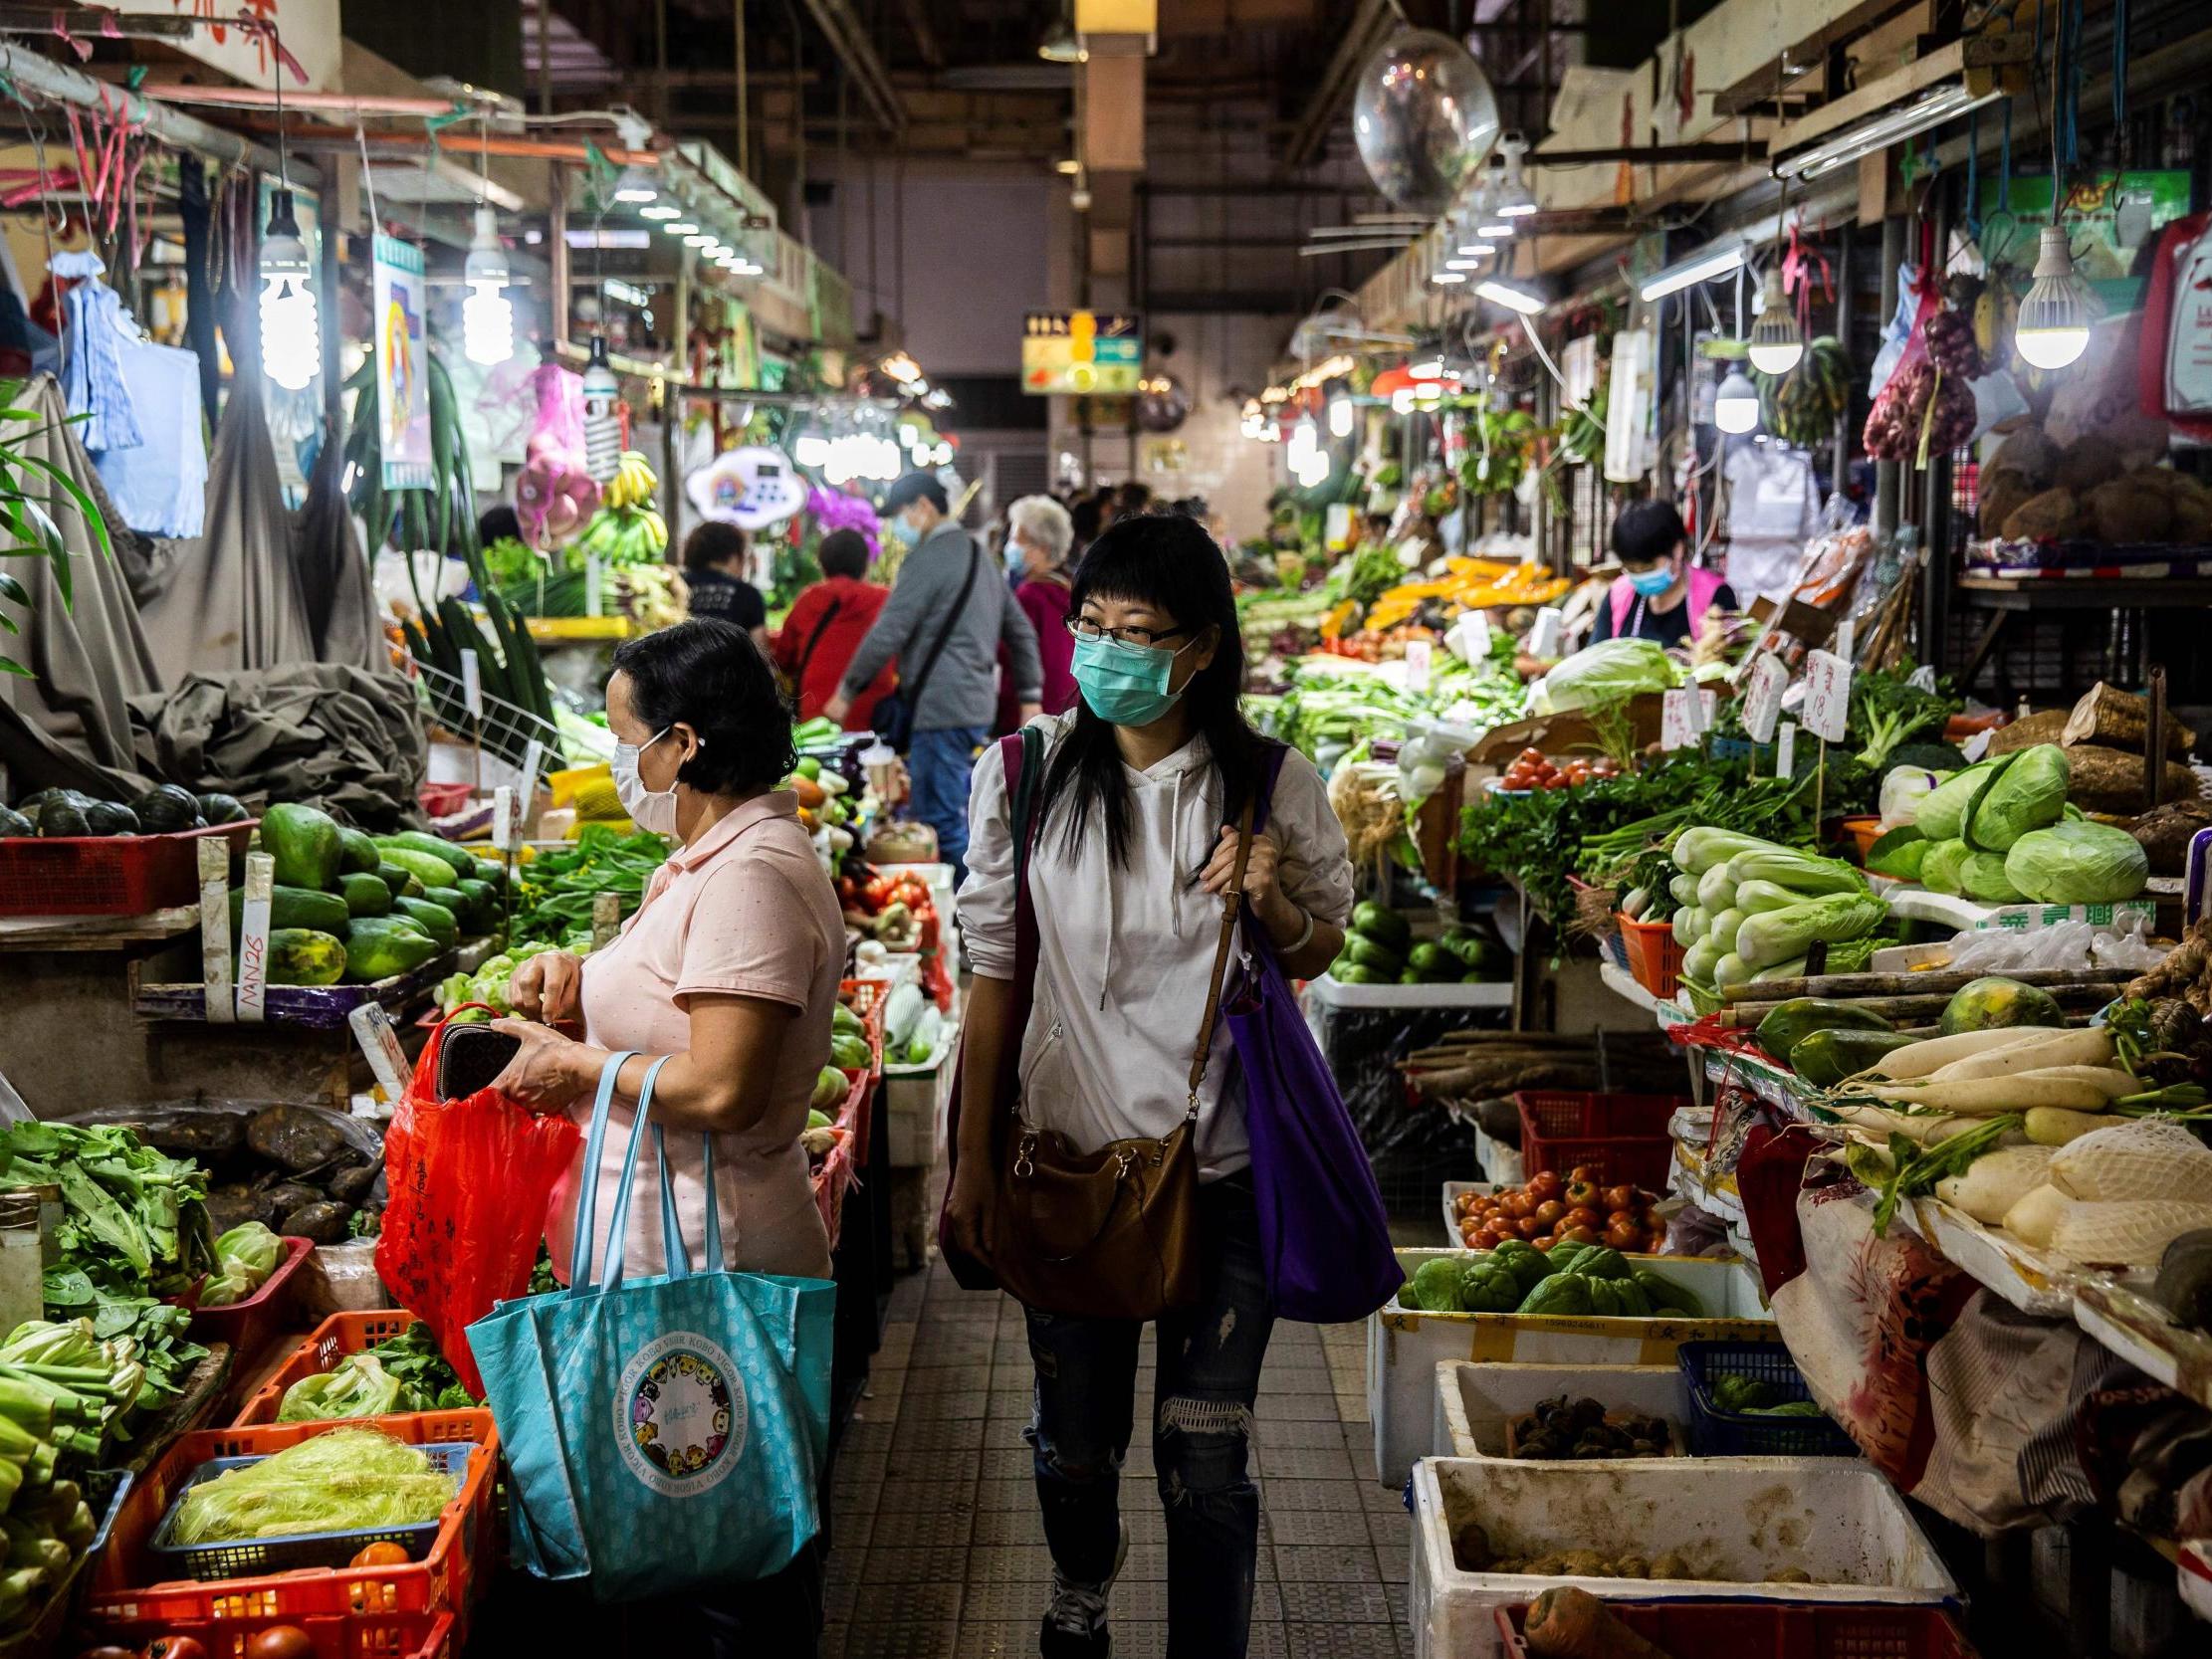 Shoppers at a wet market in Hong Kong on February 25, 2020